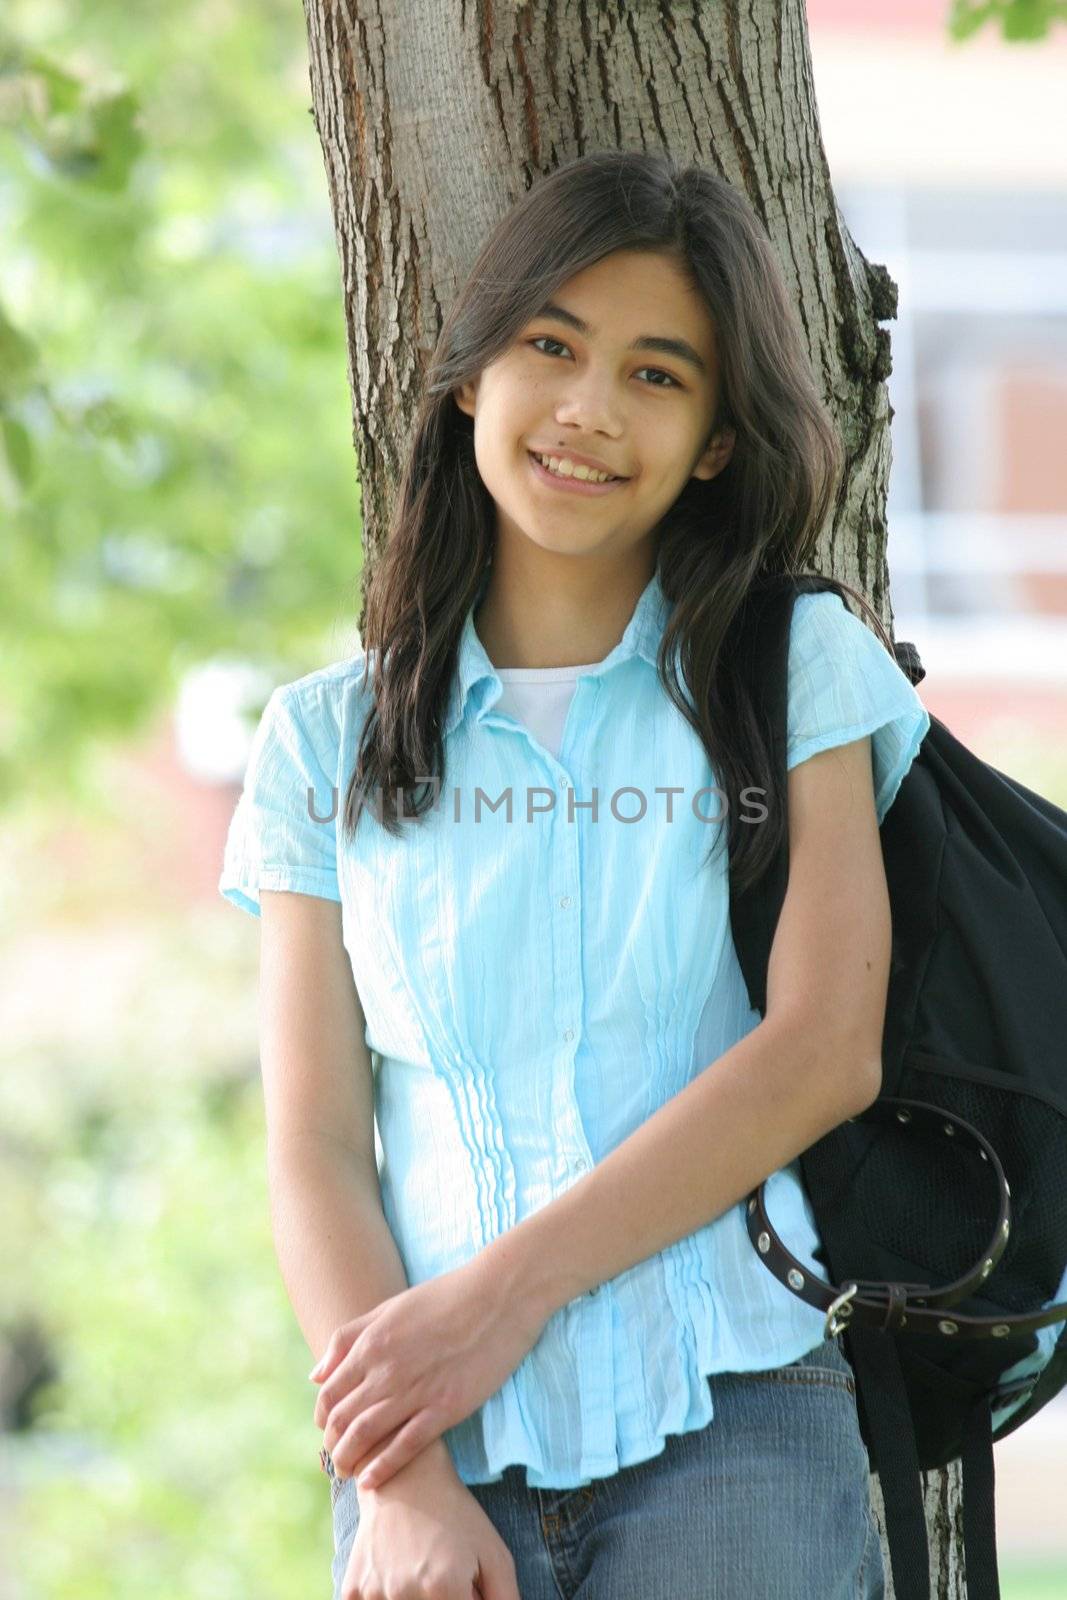 Young teen girl standing with backpack by tree, smiling. by jarenwicklund